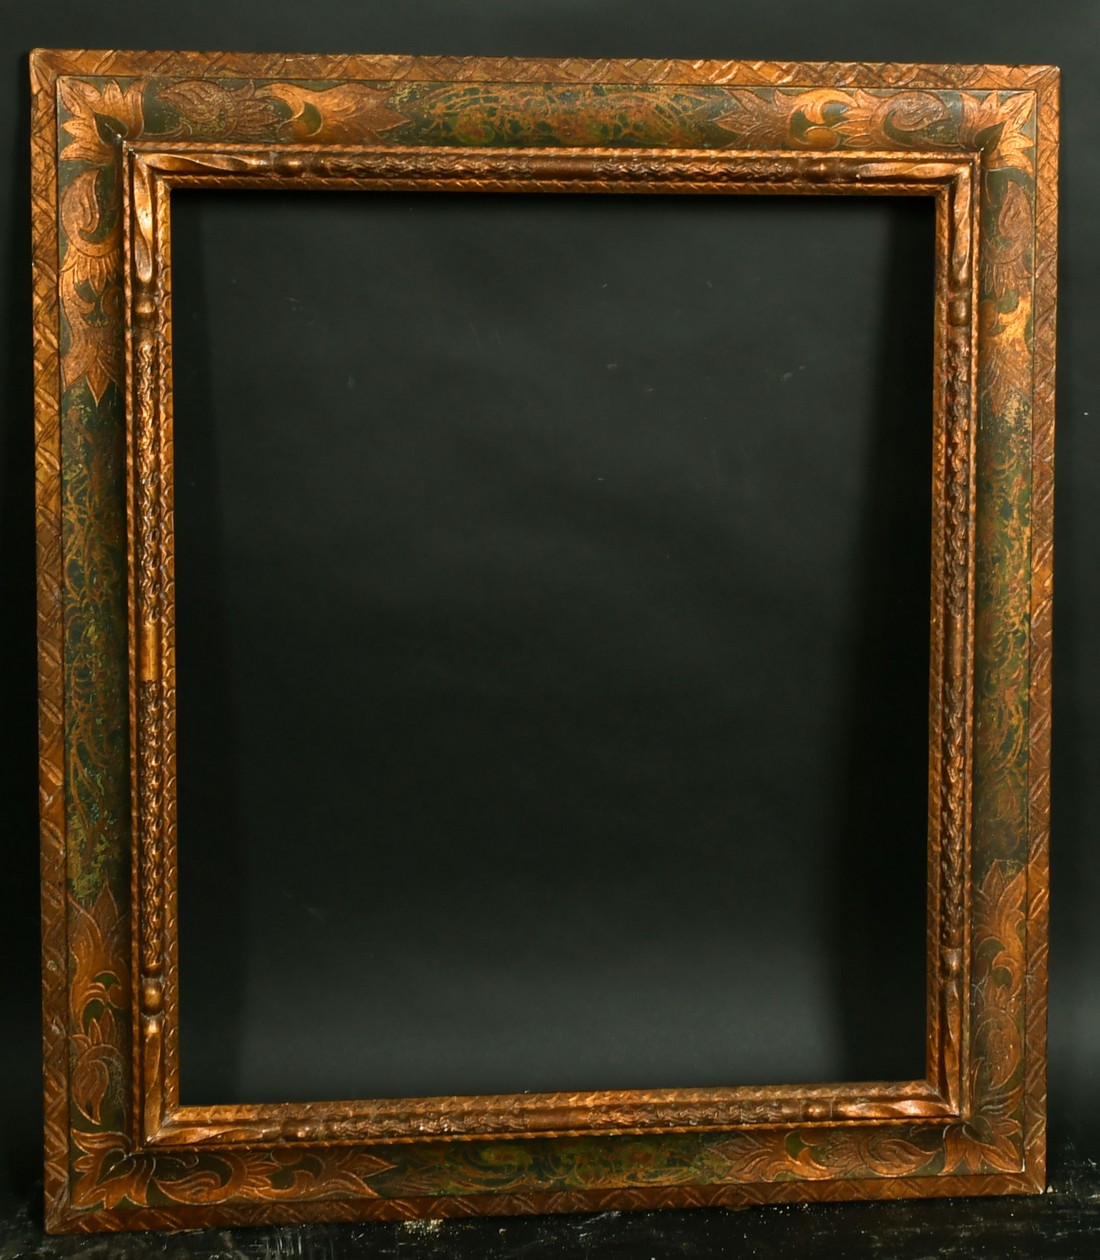 A Spanish incised frame, rebate size 18" x 22", (46 x 56 cm). - Image 2 of 2